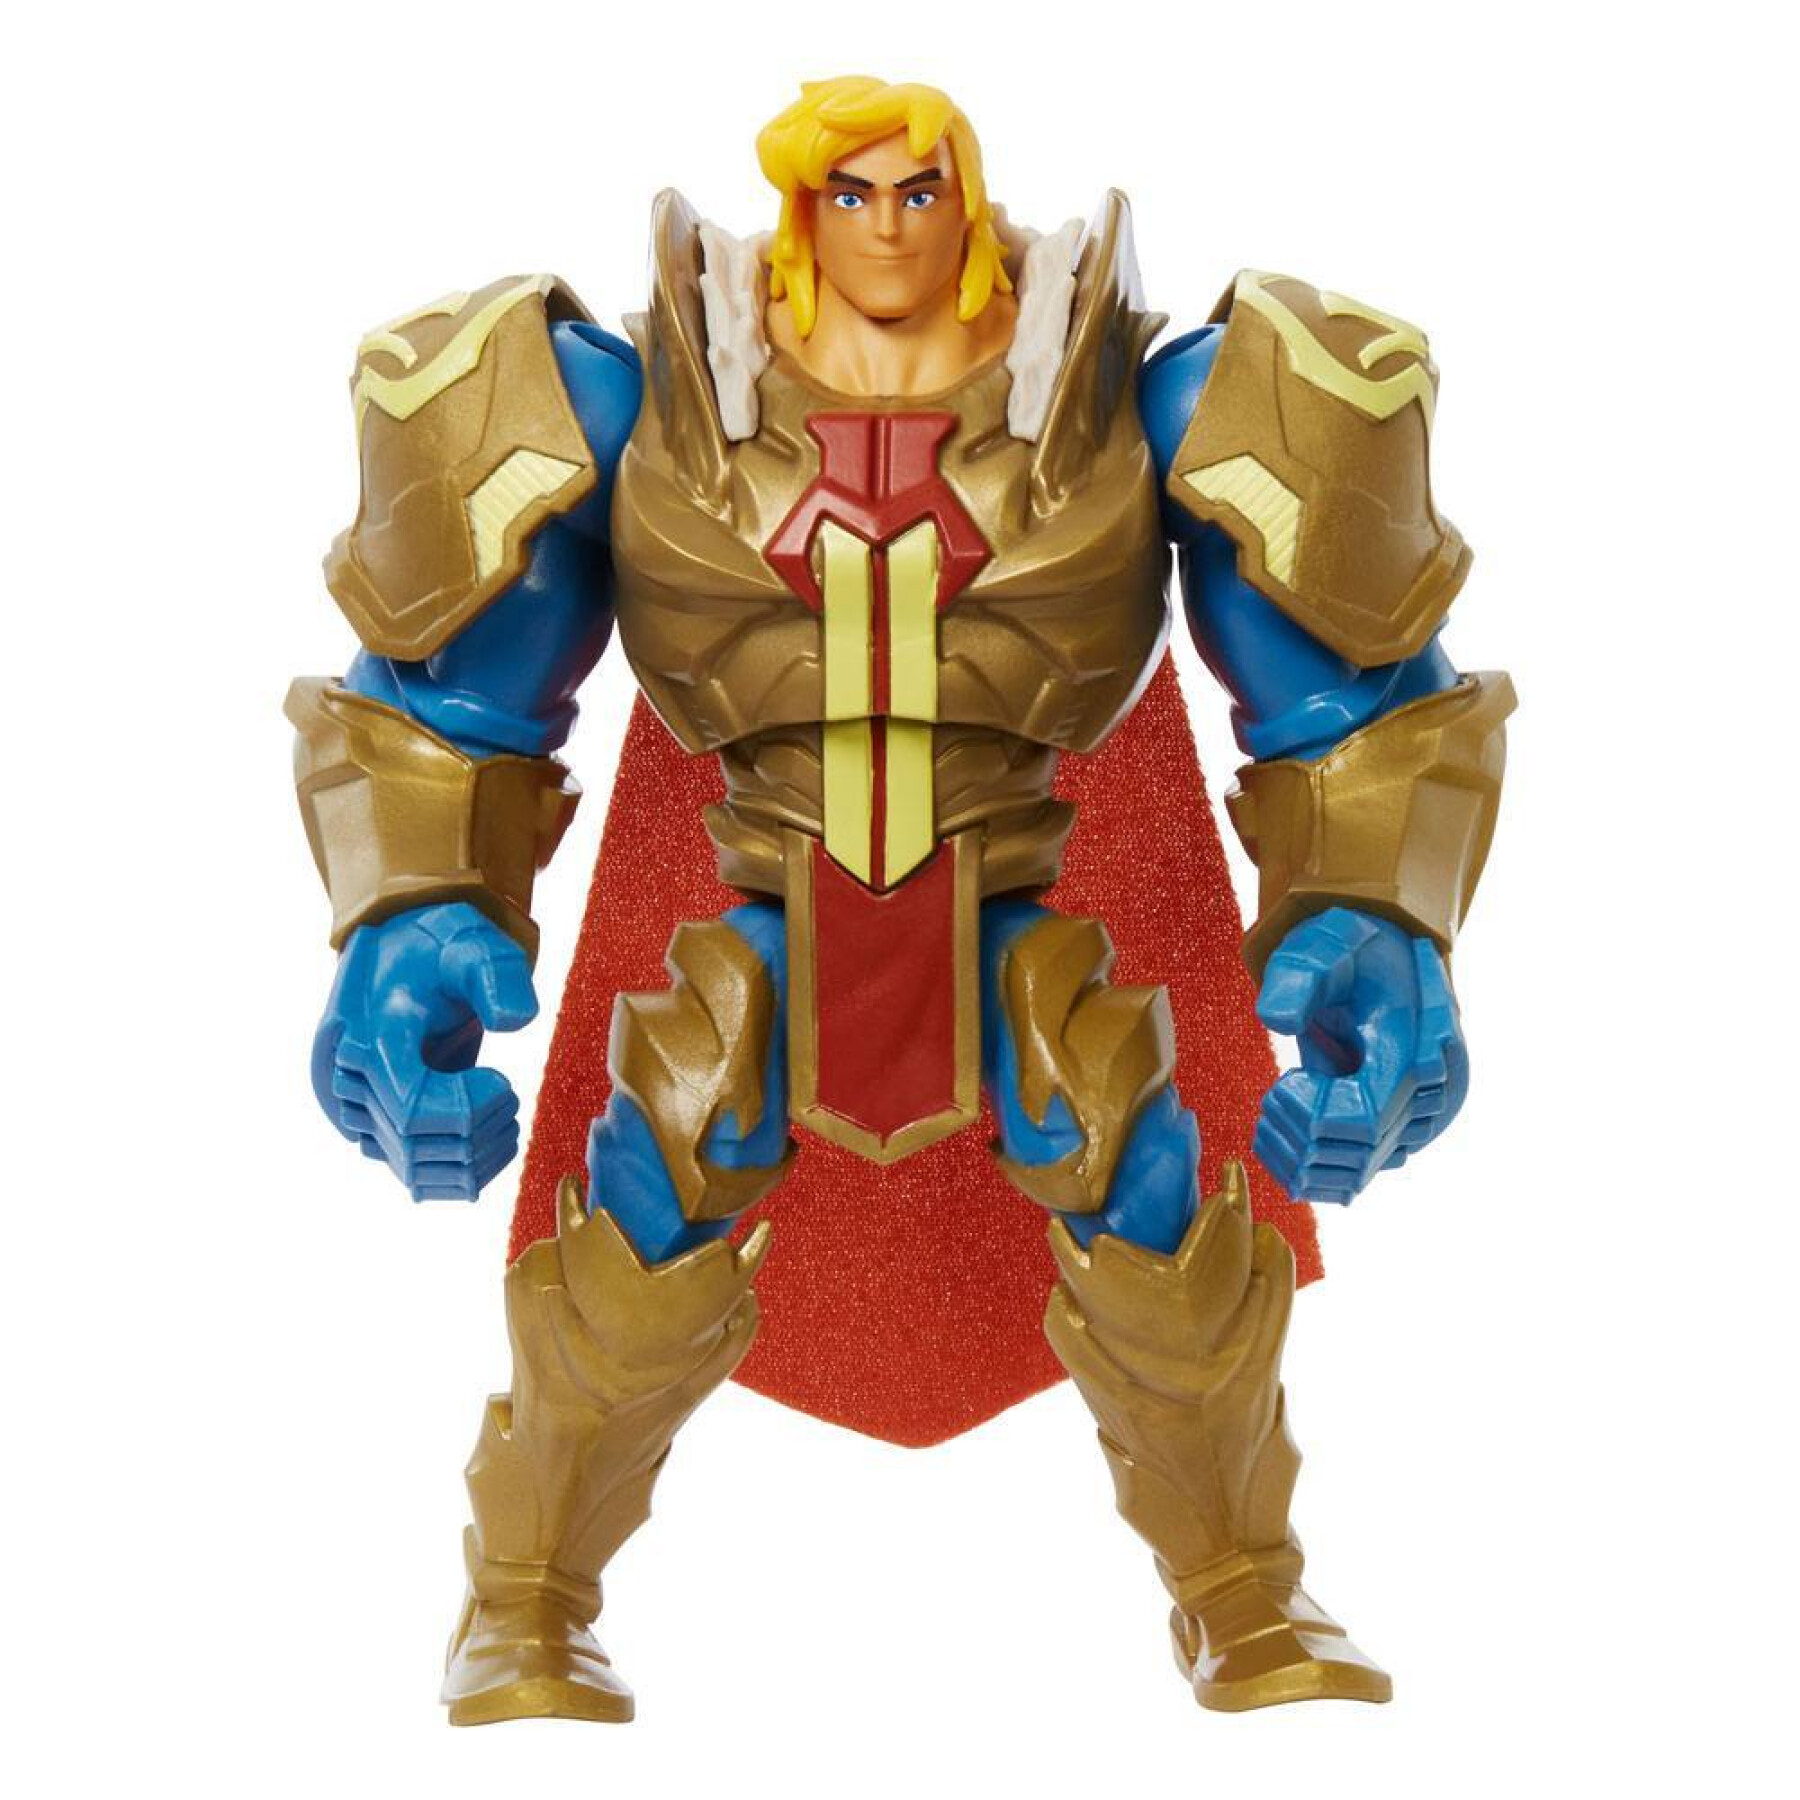 Figurine Mattel He-Man and the Masters of the Universe 2022 Deluxe He-Man